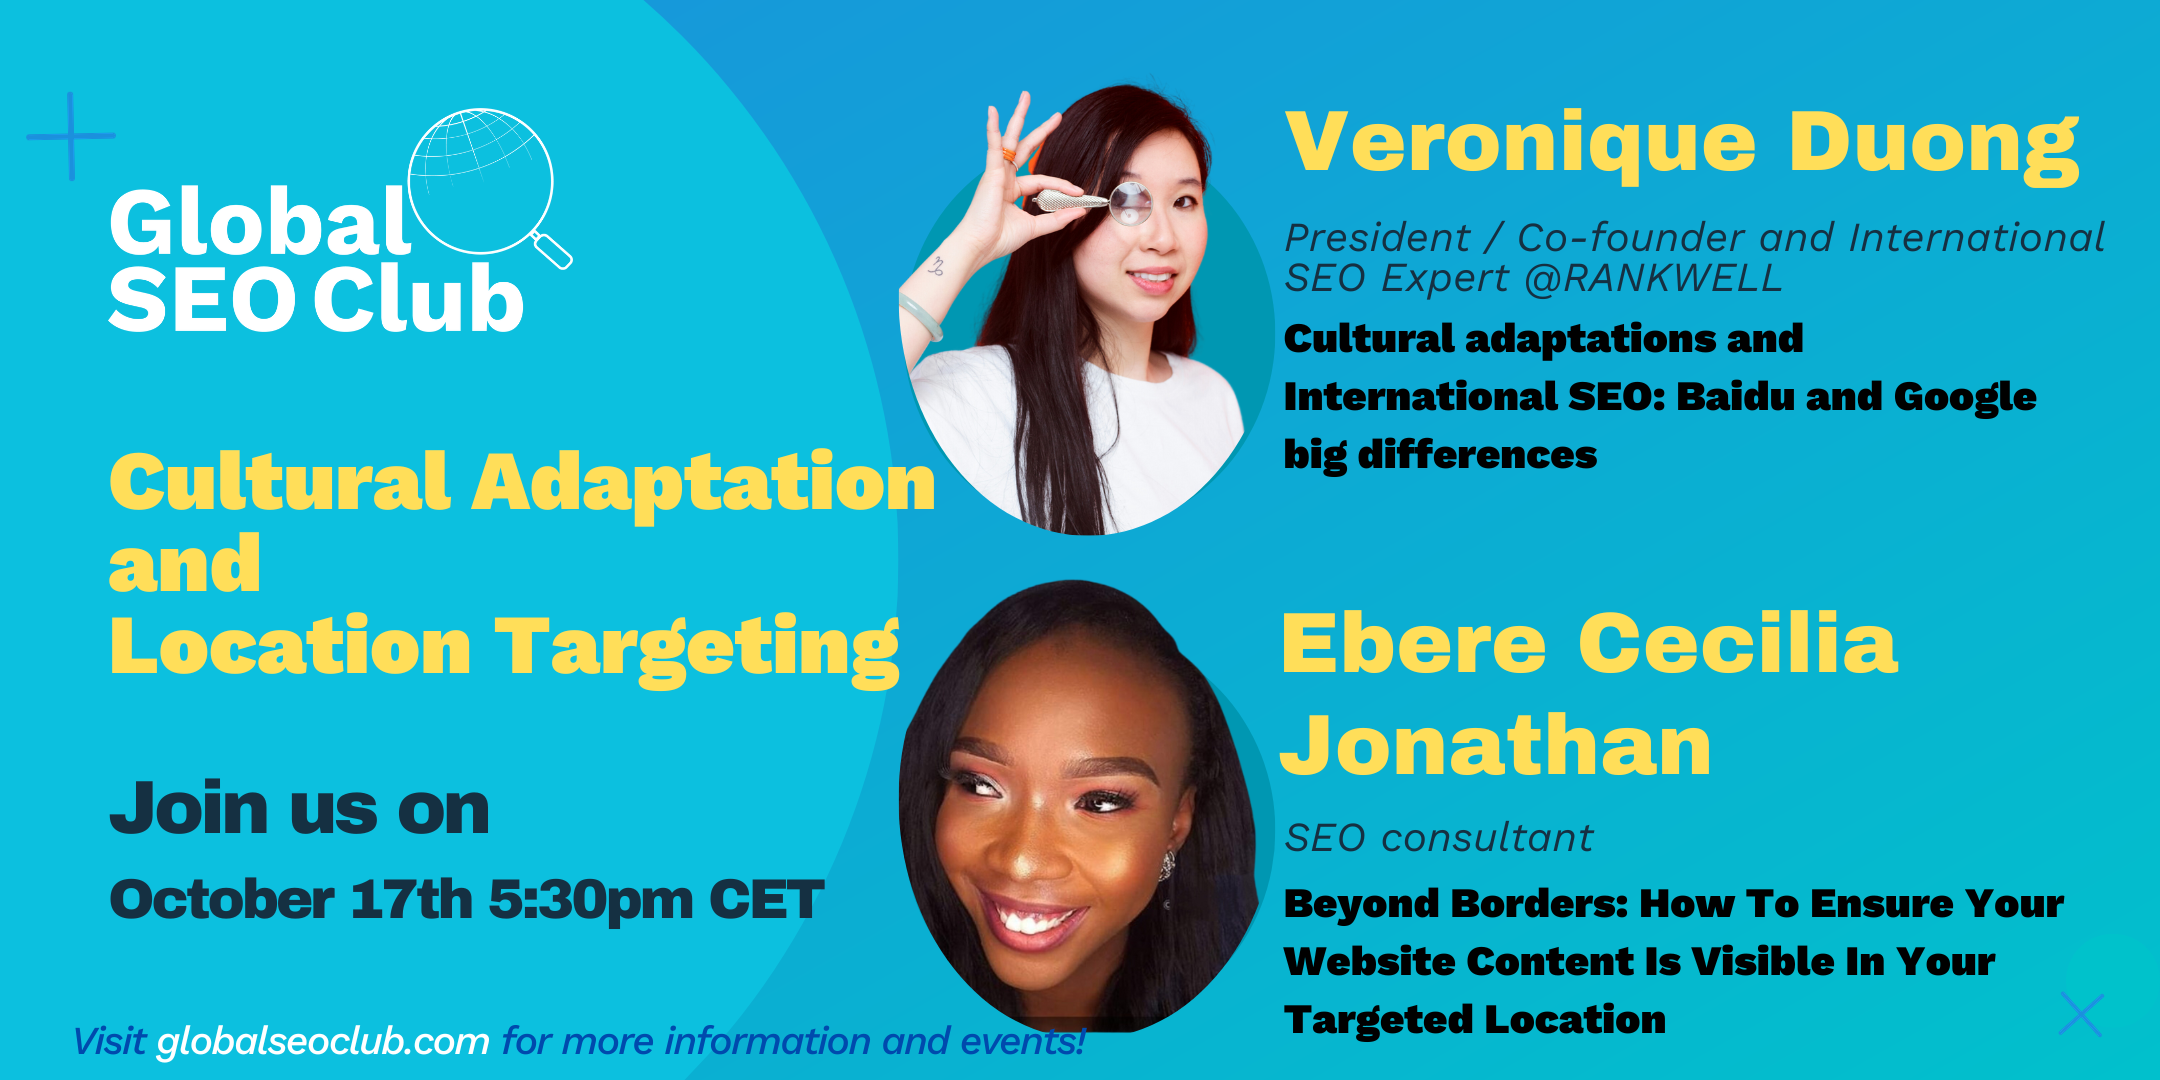 October Event with Veronique Duong and Ebere Cecilia Jonathan